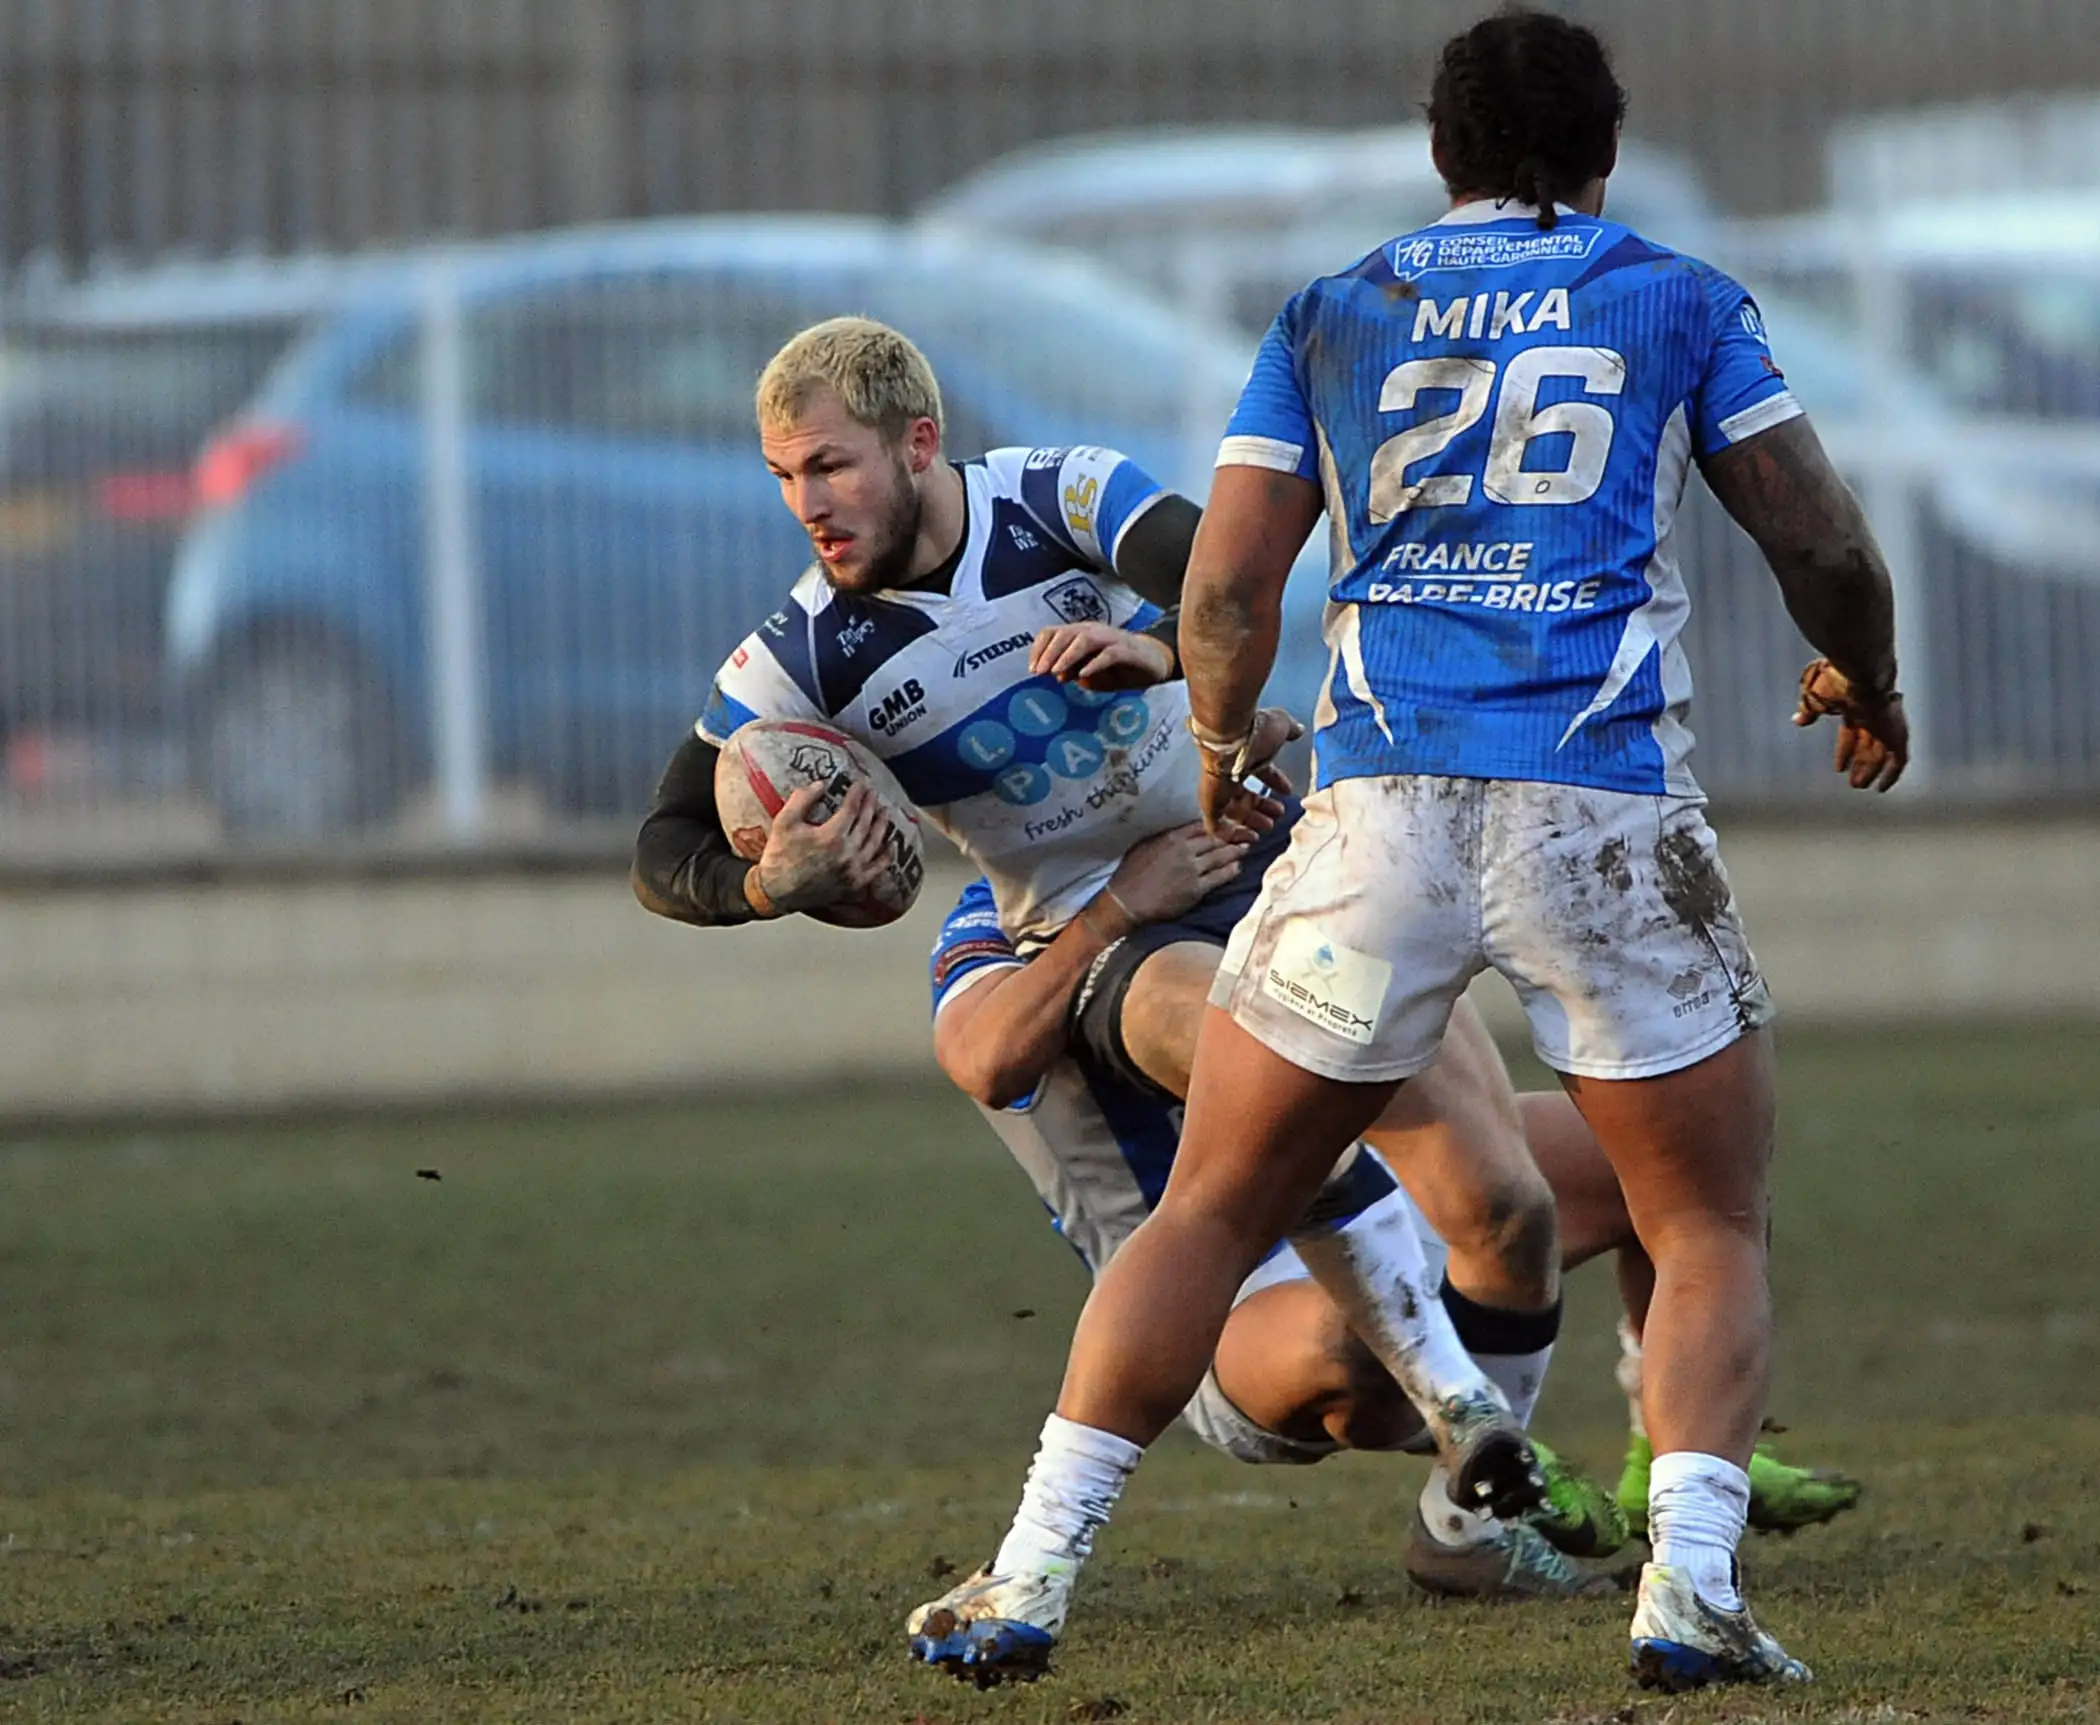 Featherstone winger Briscoe breaks Martin Offiah try record